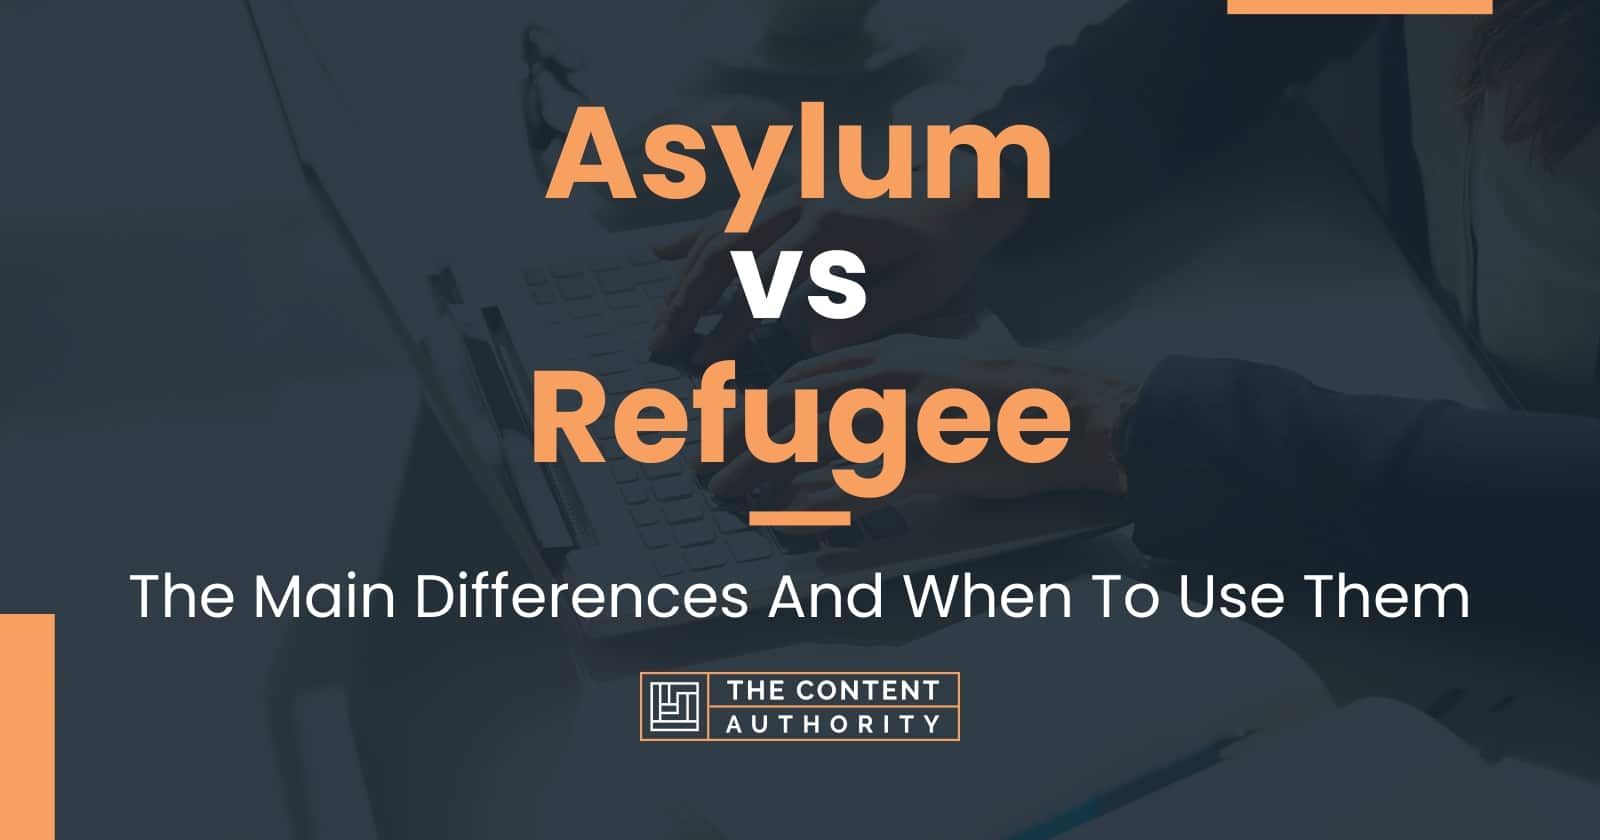 Asylum Vs Refugee The Main Differences And When To Use Them